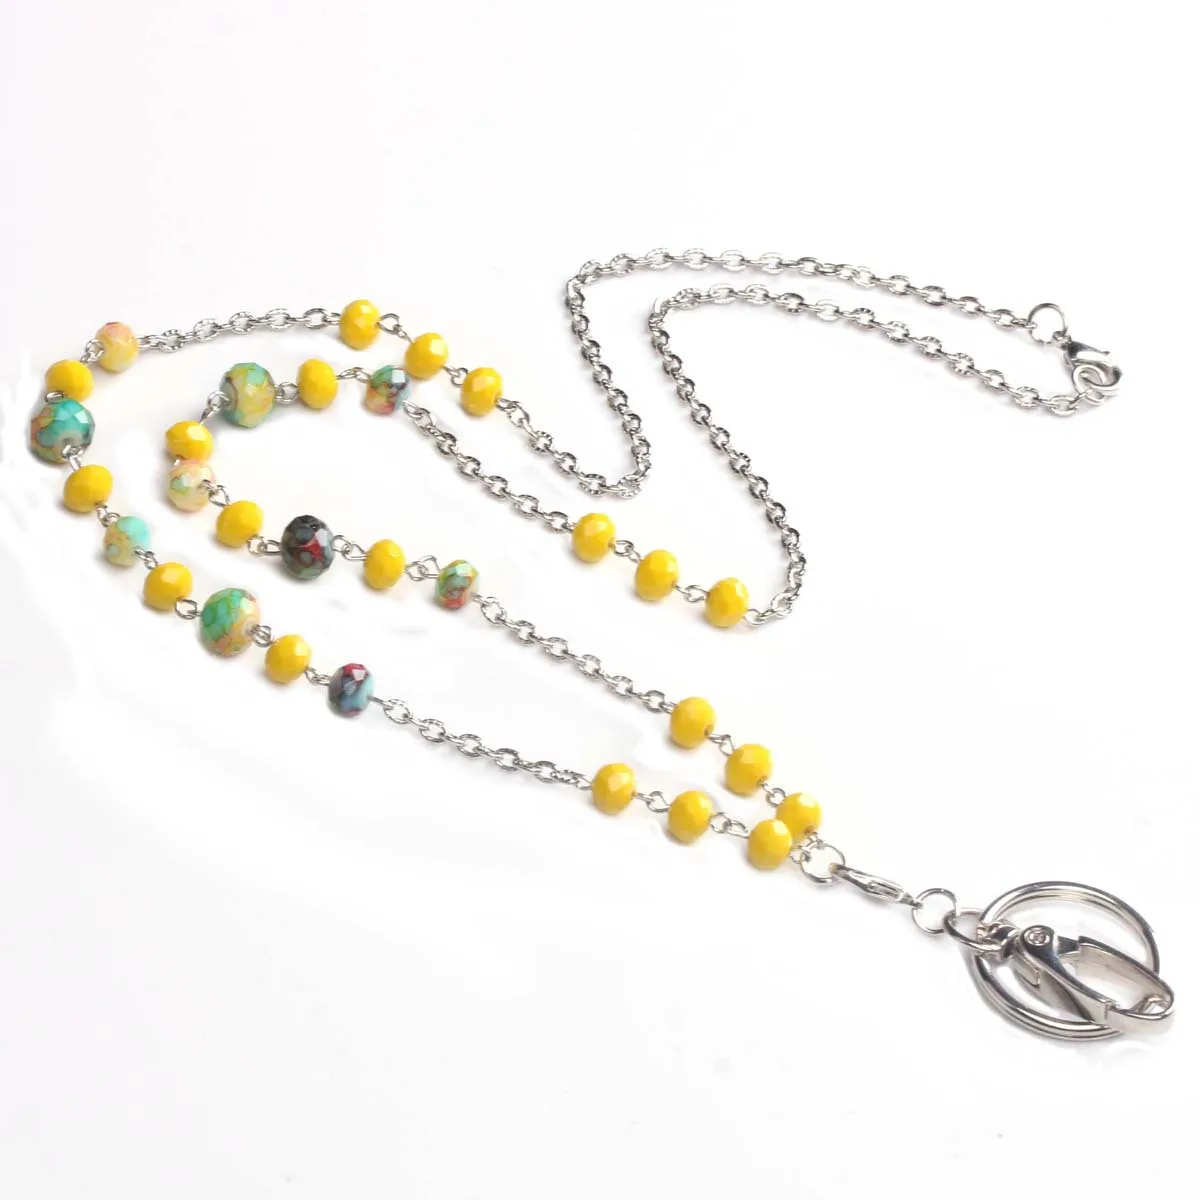 

Yellow Beaded Lanyard Necklaces Key Holder Clips ID Card Badge Holder Lanyards Nurse Accessories Medical Student